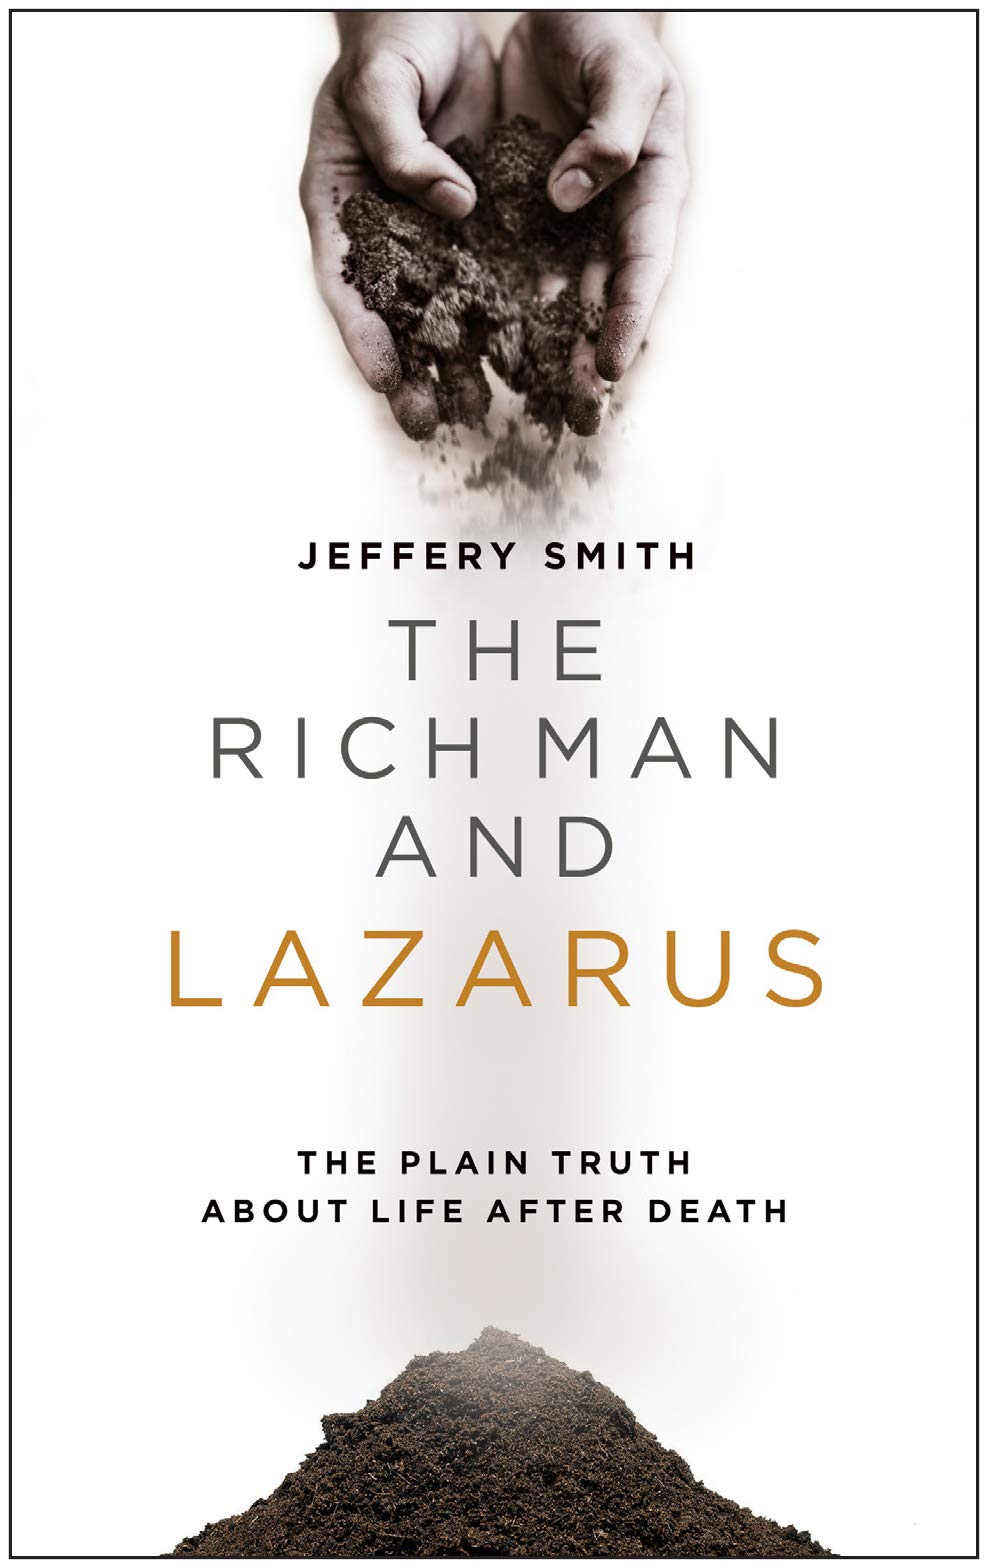 Book Notice: THE RICH MAN AND LAZARUS, by Jeffery Smith